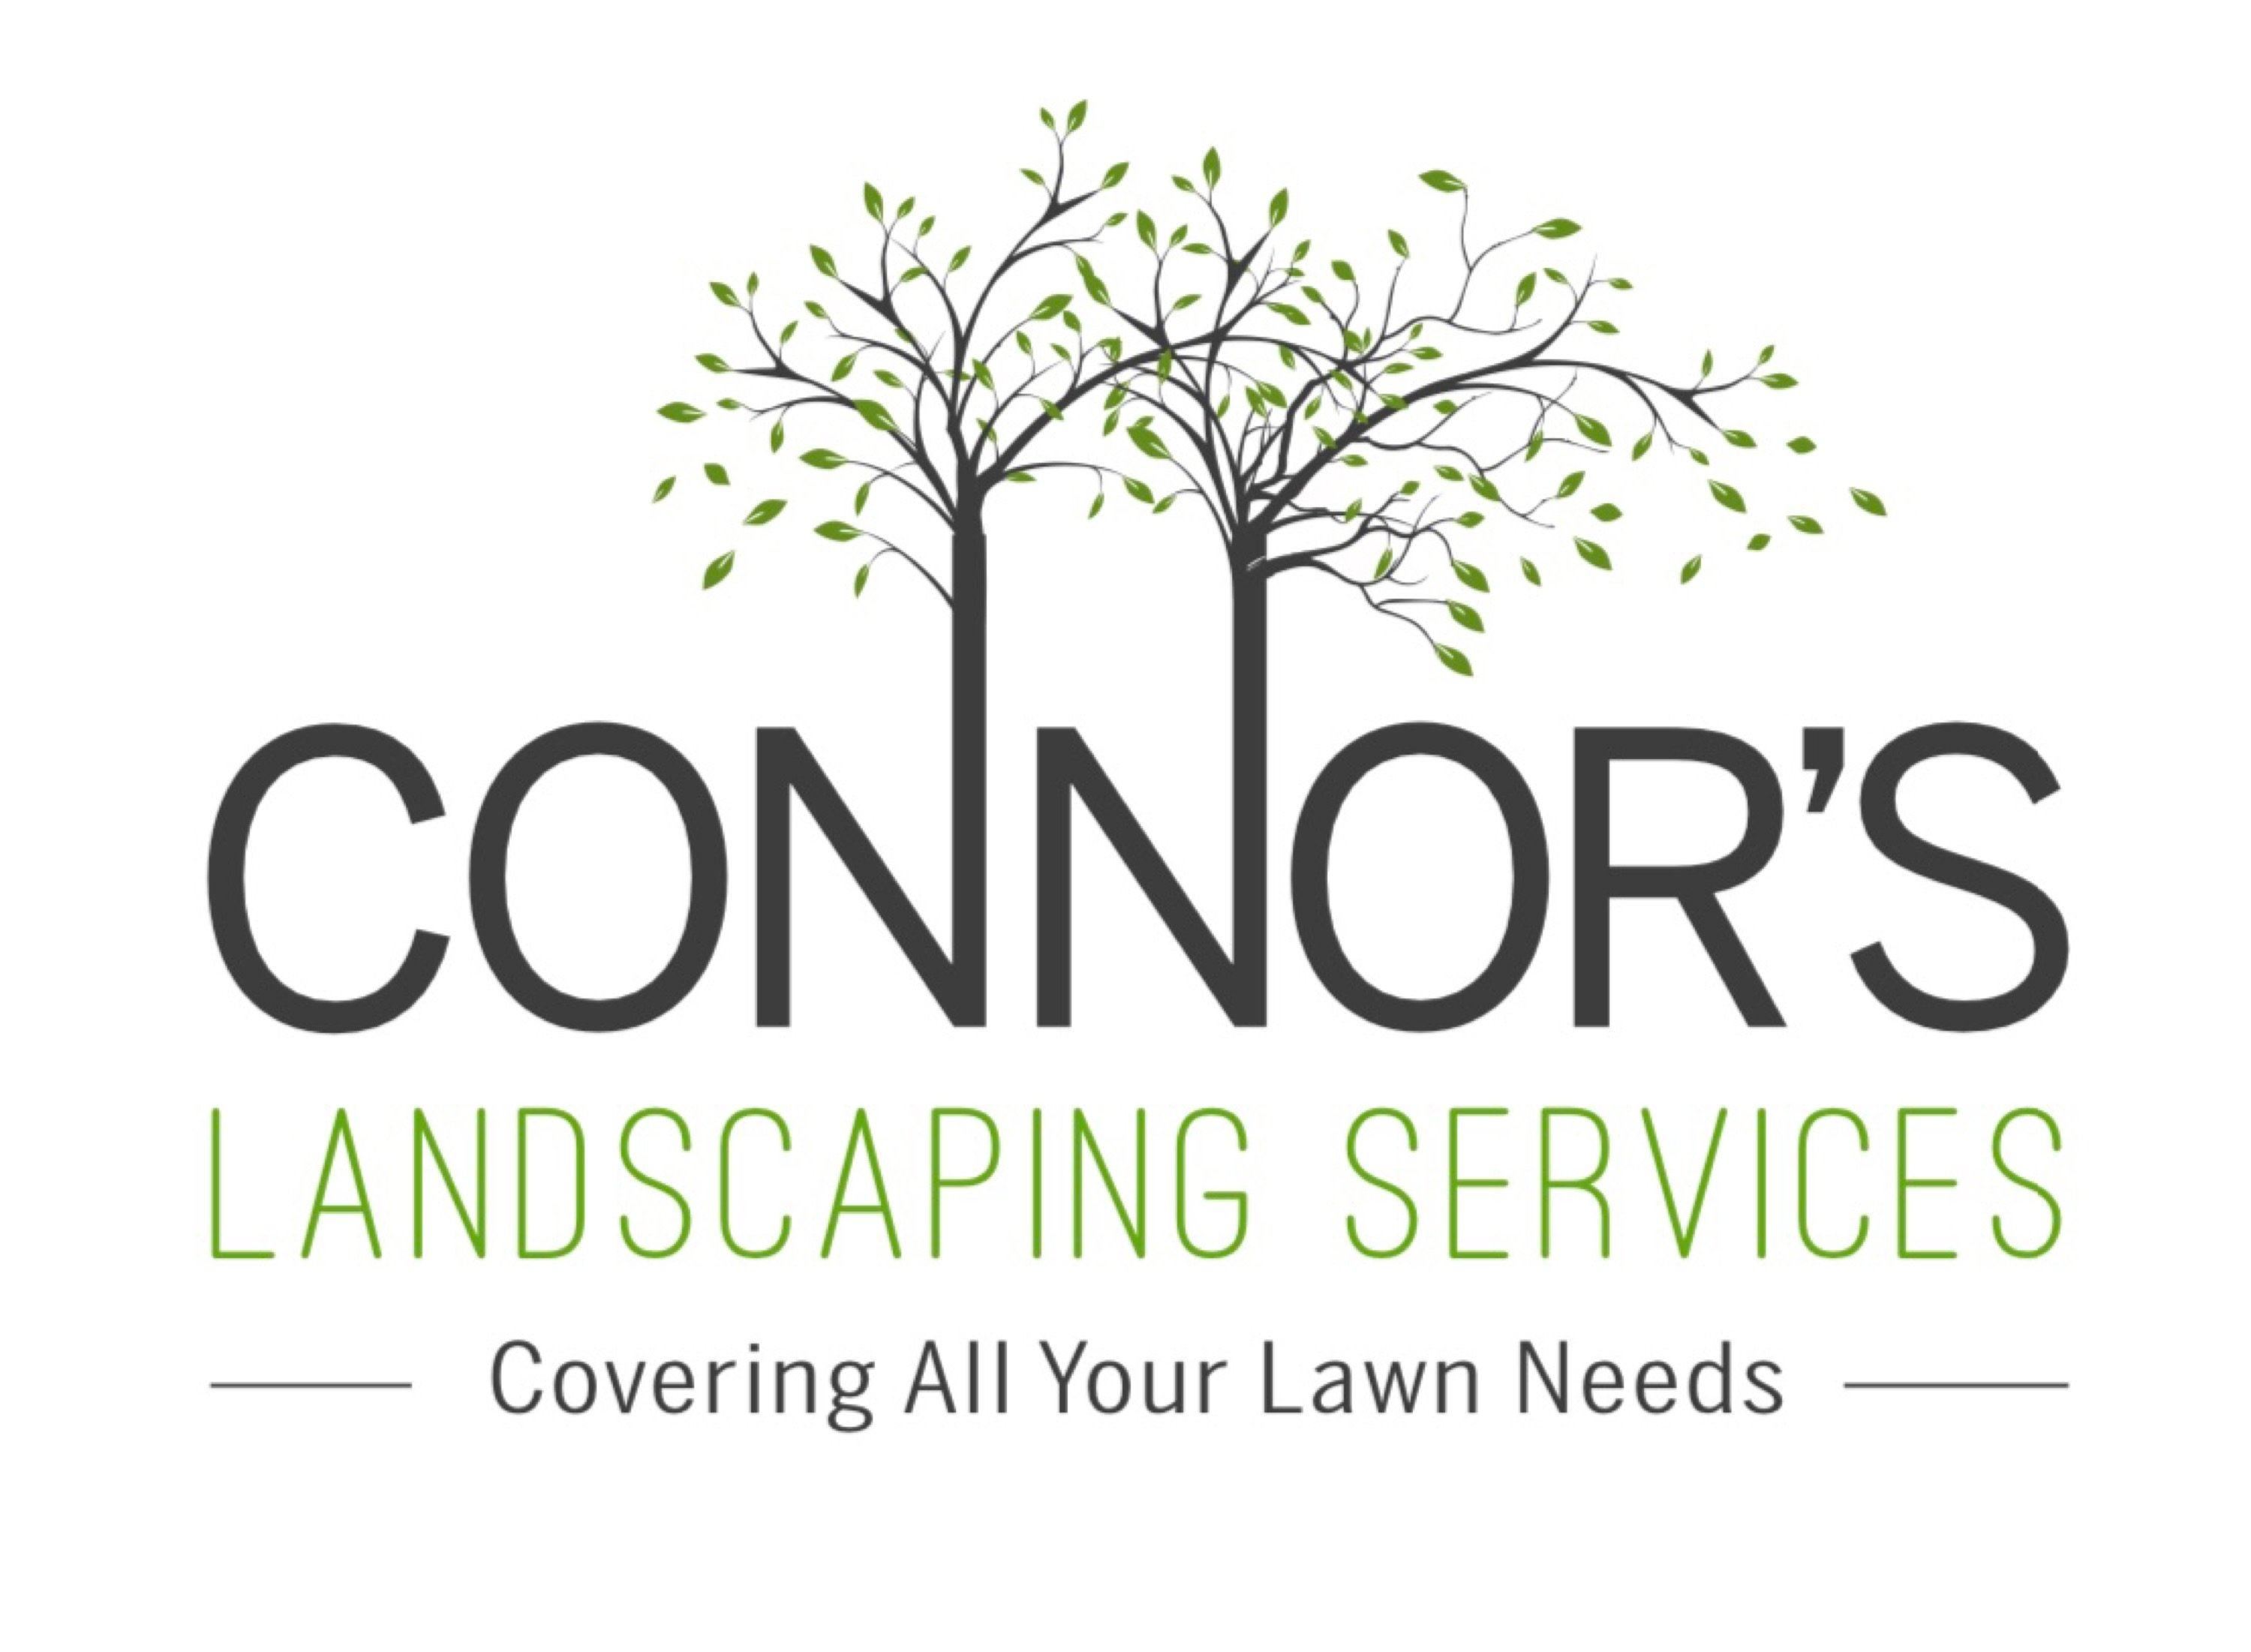 Connor's Landscaping Services, LLC Logo